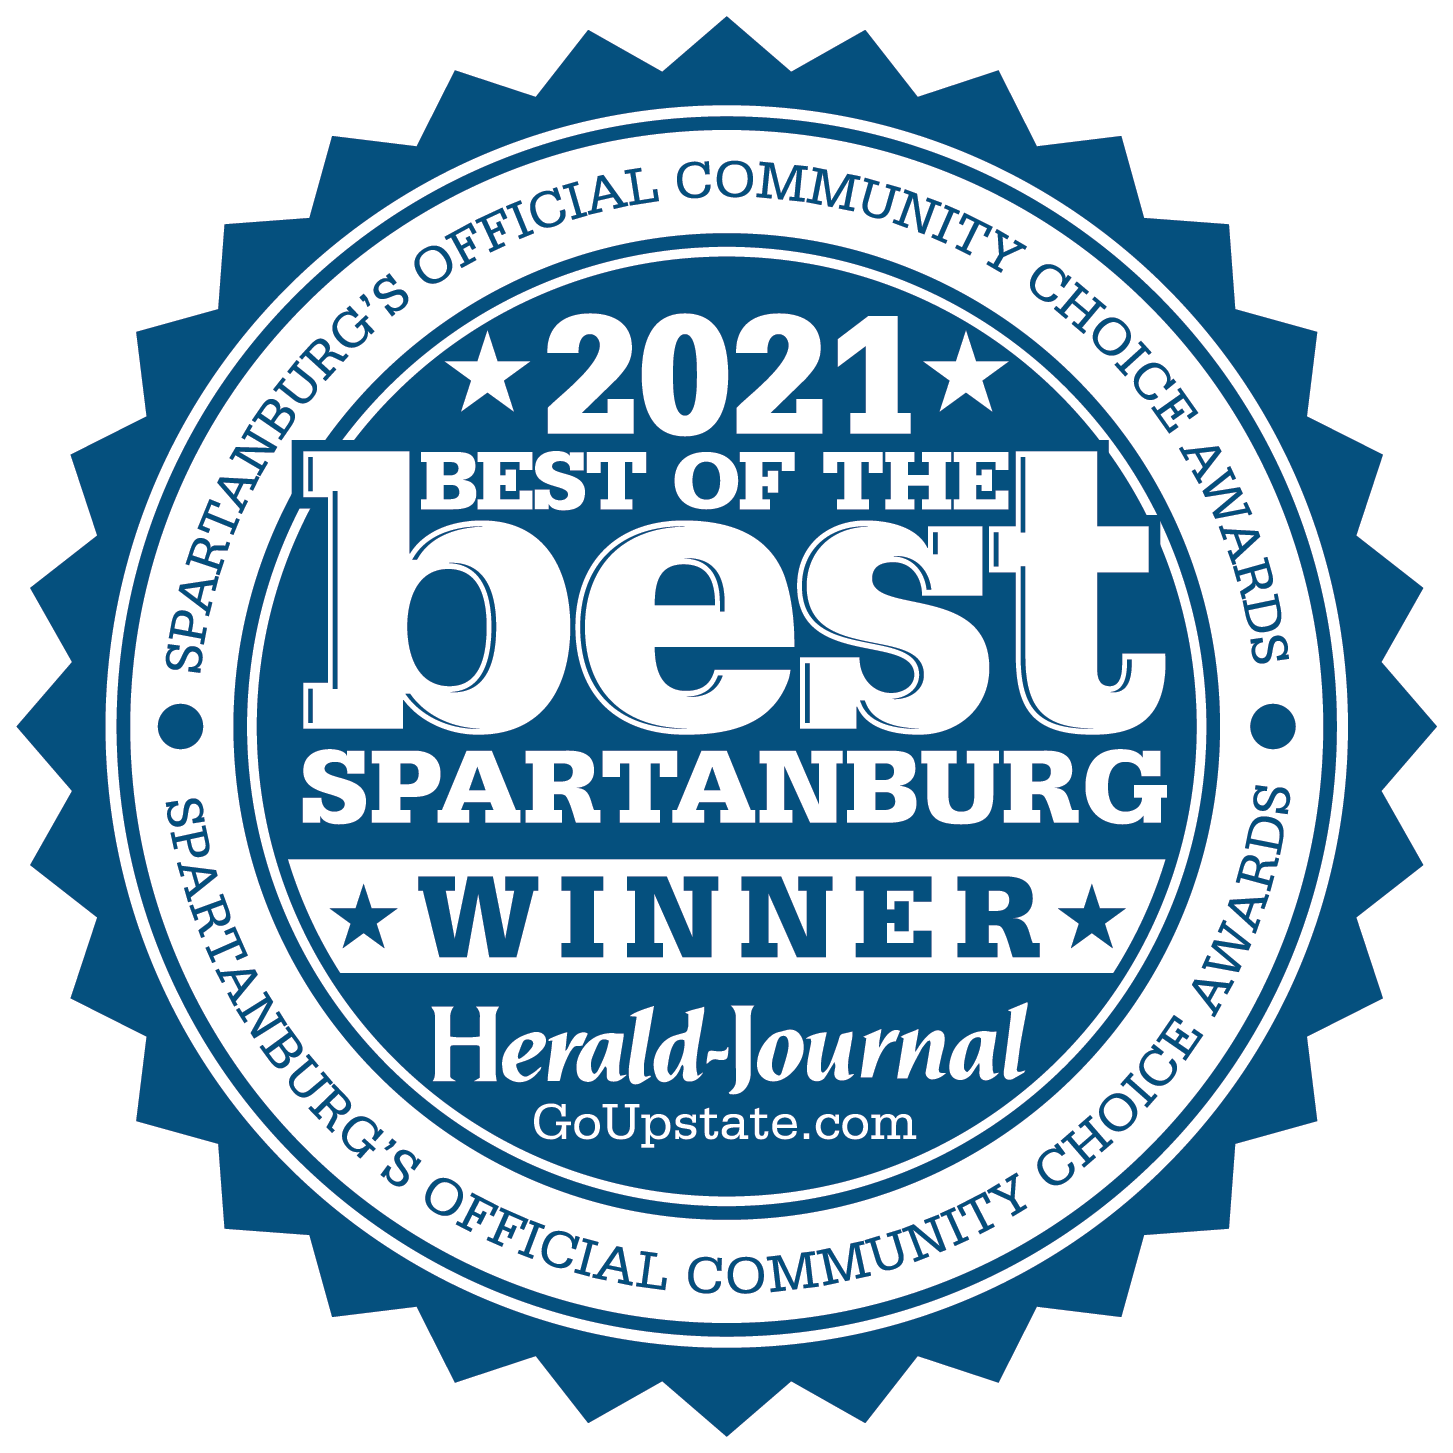 2021 Best of the best spartanburg's official peoples choice award by herald journal